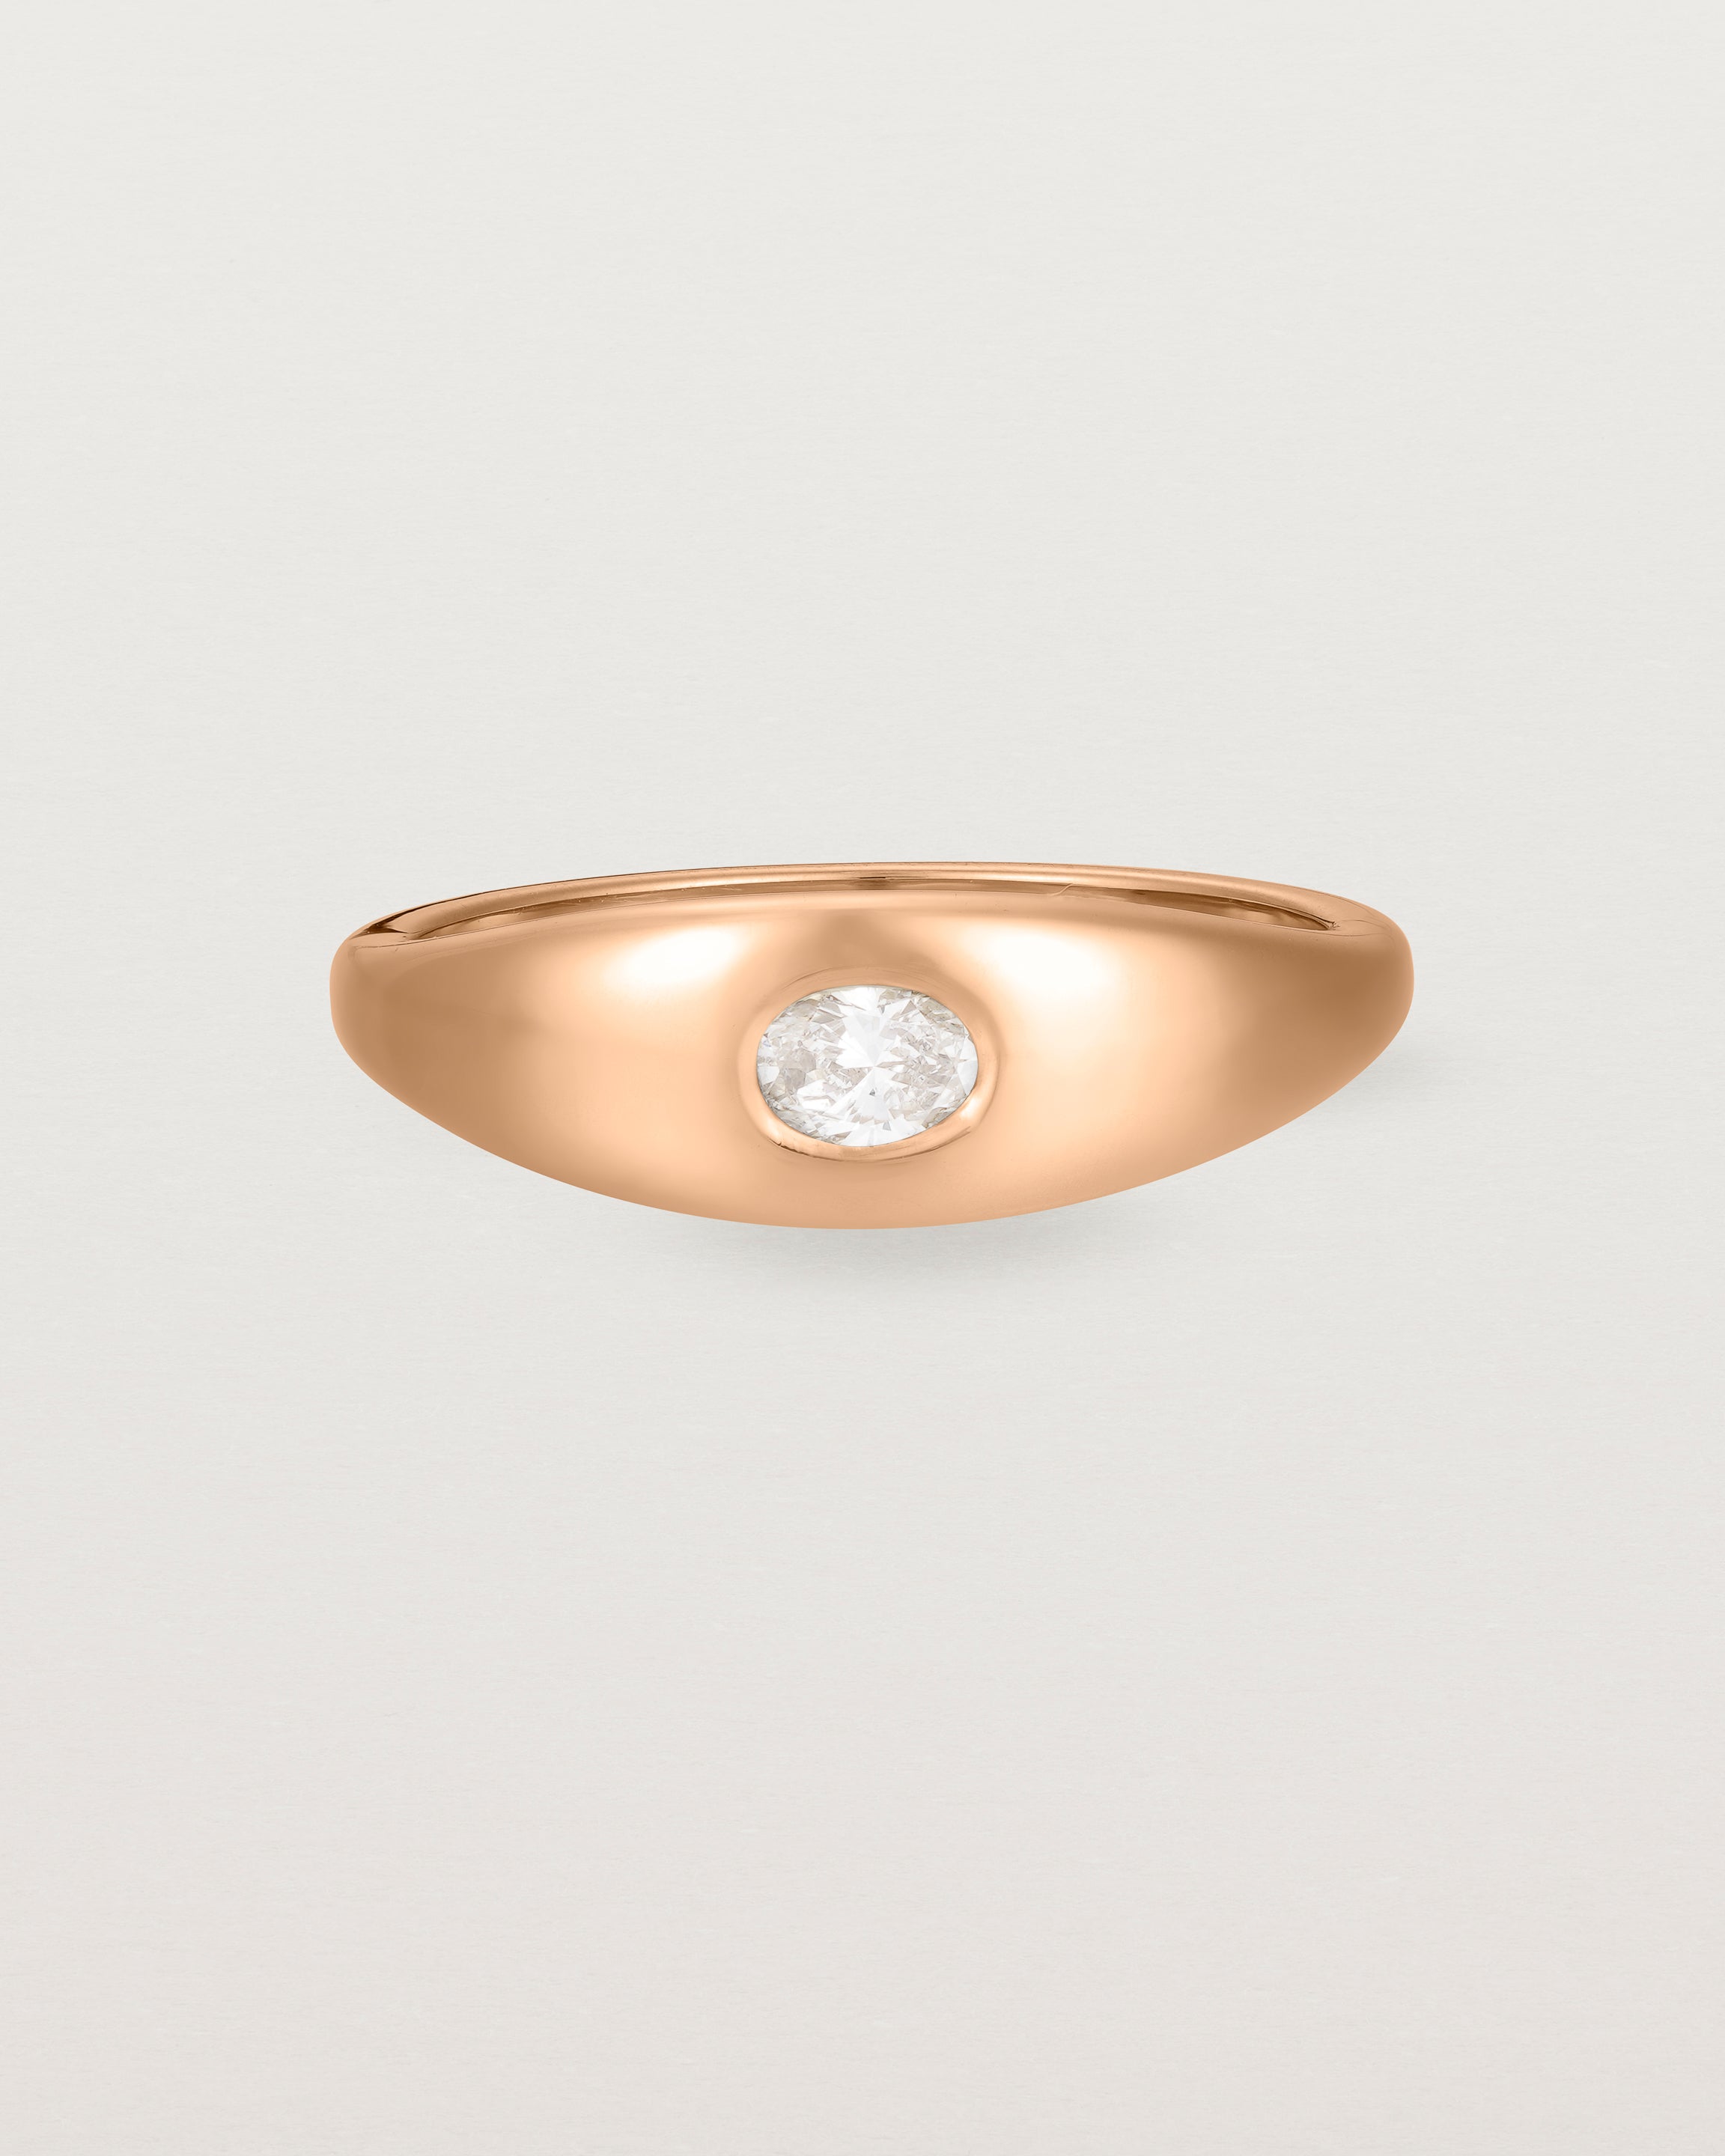 Front view of the Seule Single Ring | Diamond | Rose Gold.